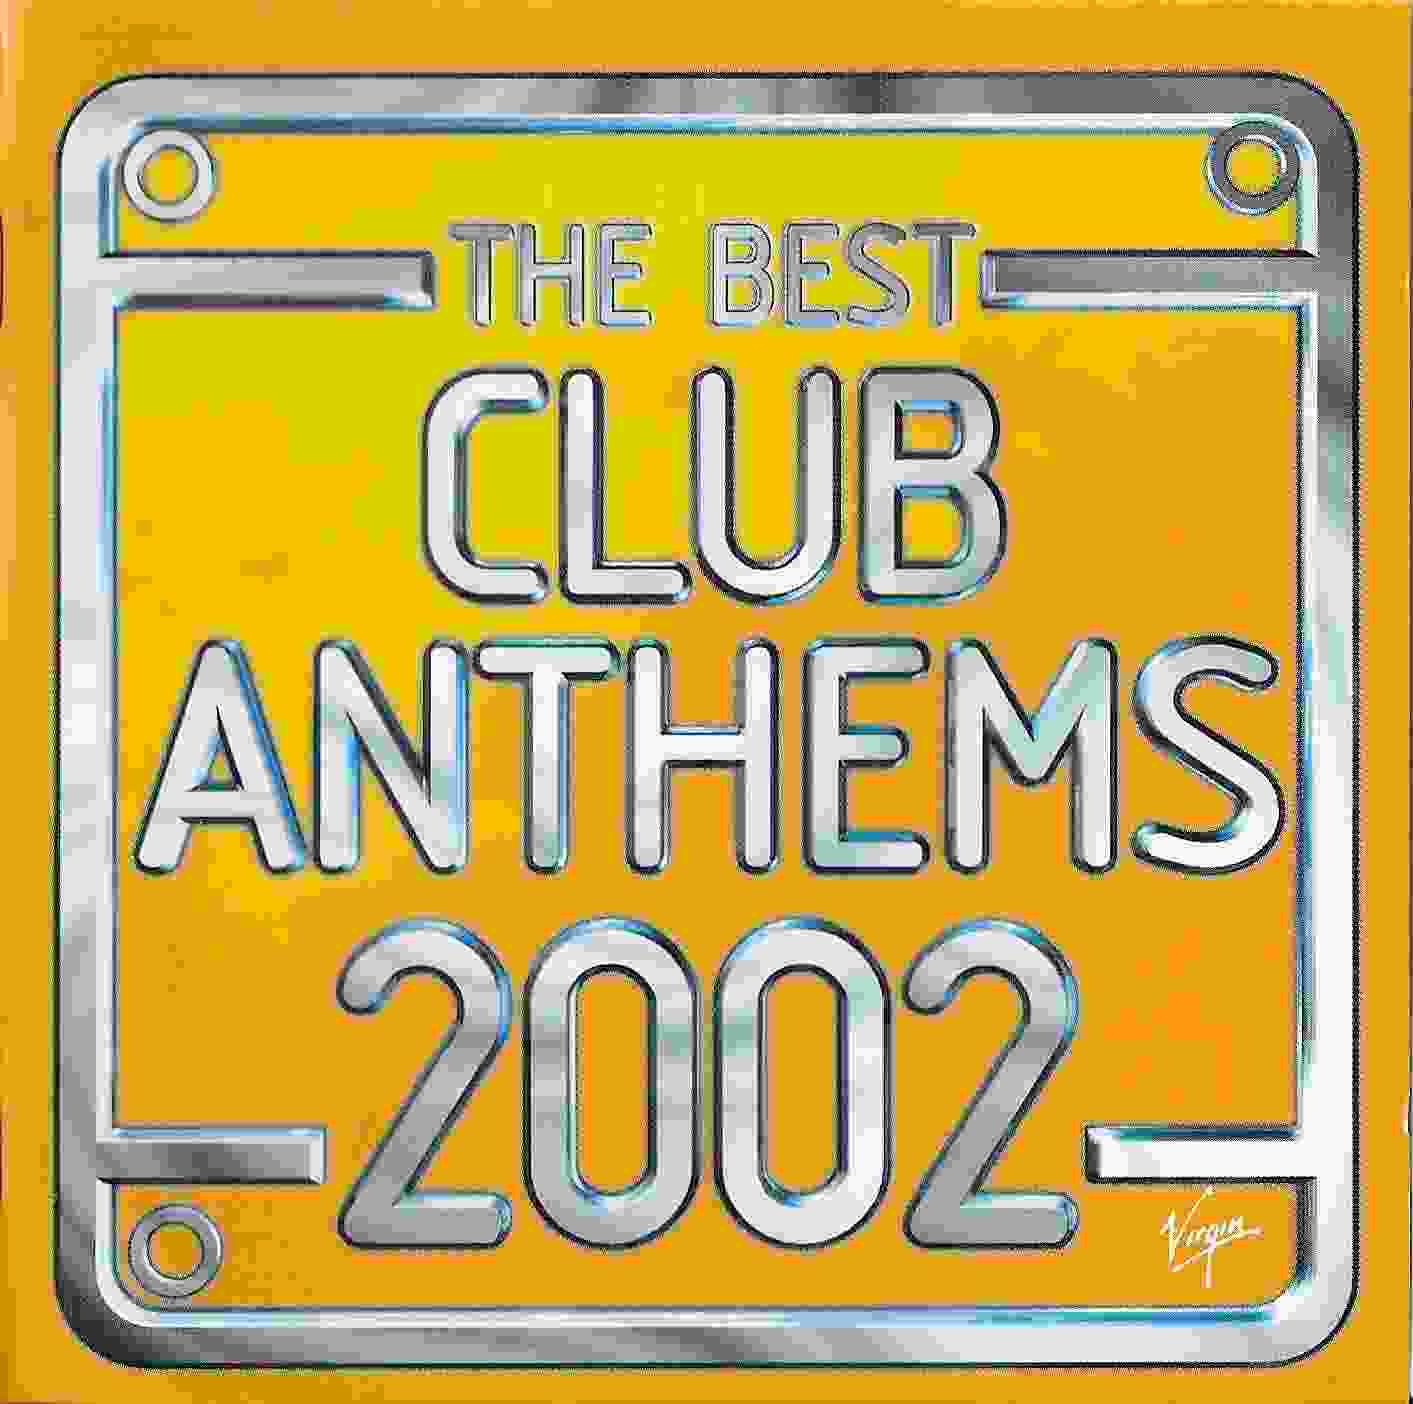 Picture of VTDCD 401 The best club anthems 2002 by artist Various 